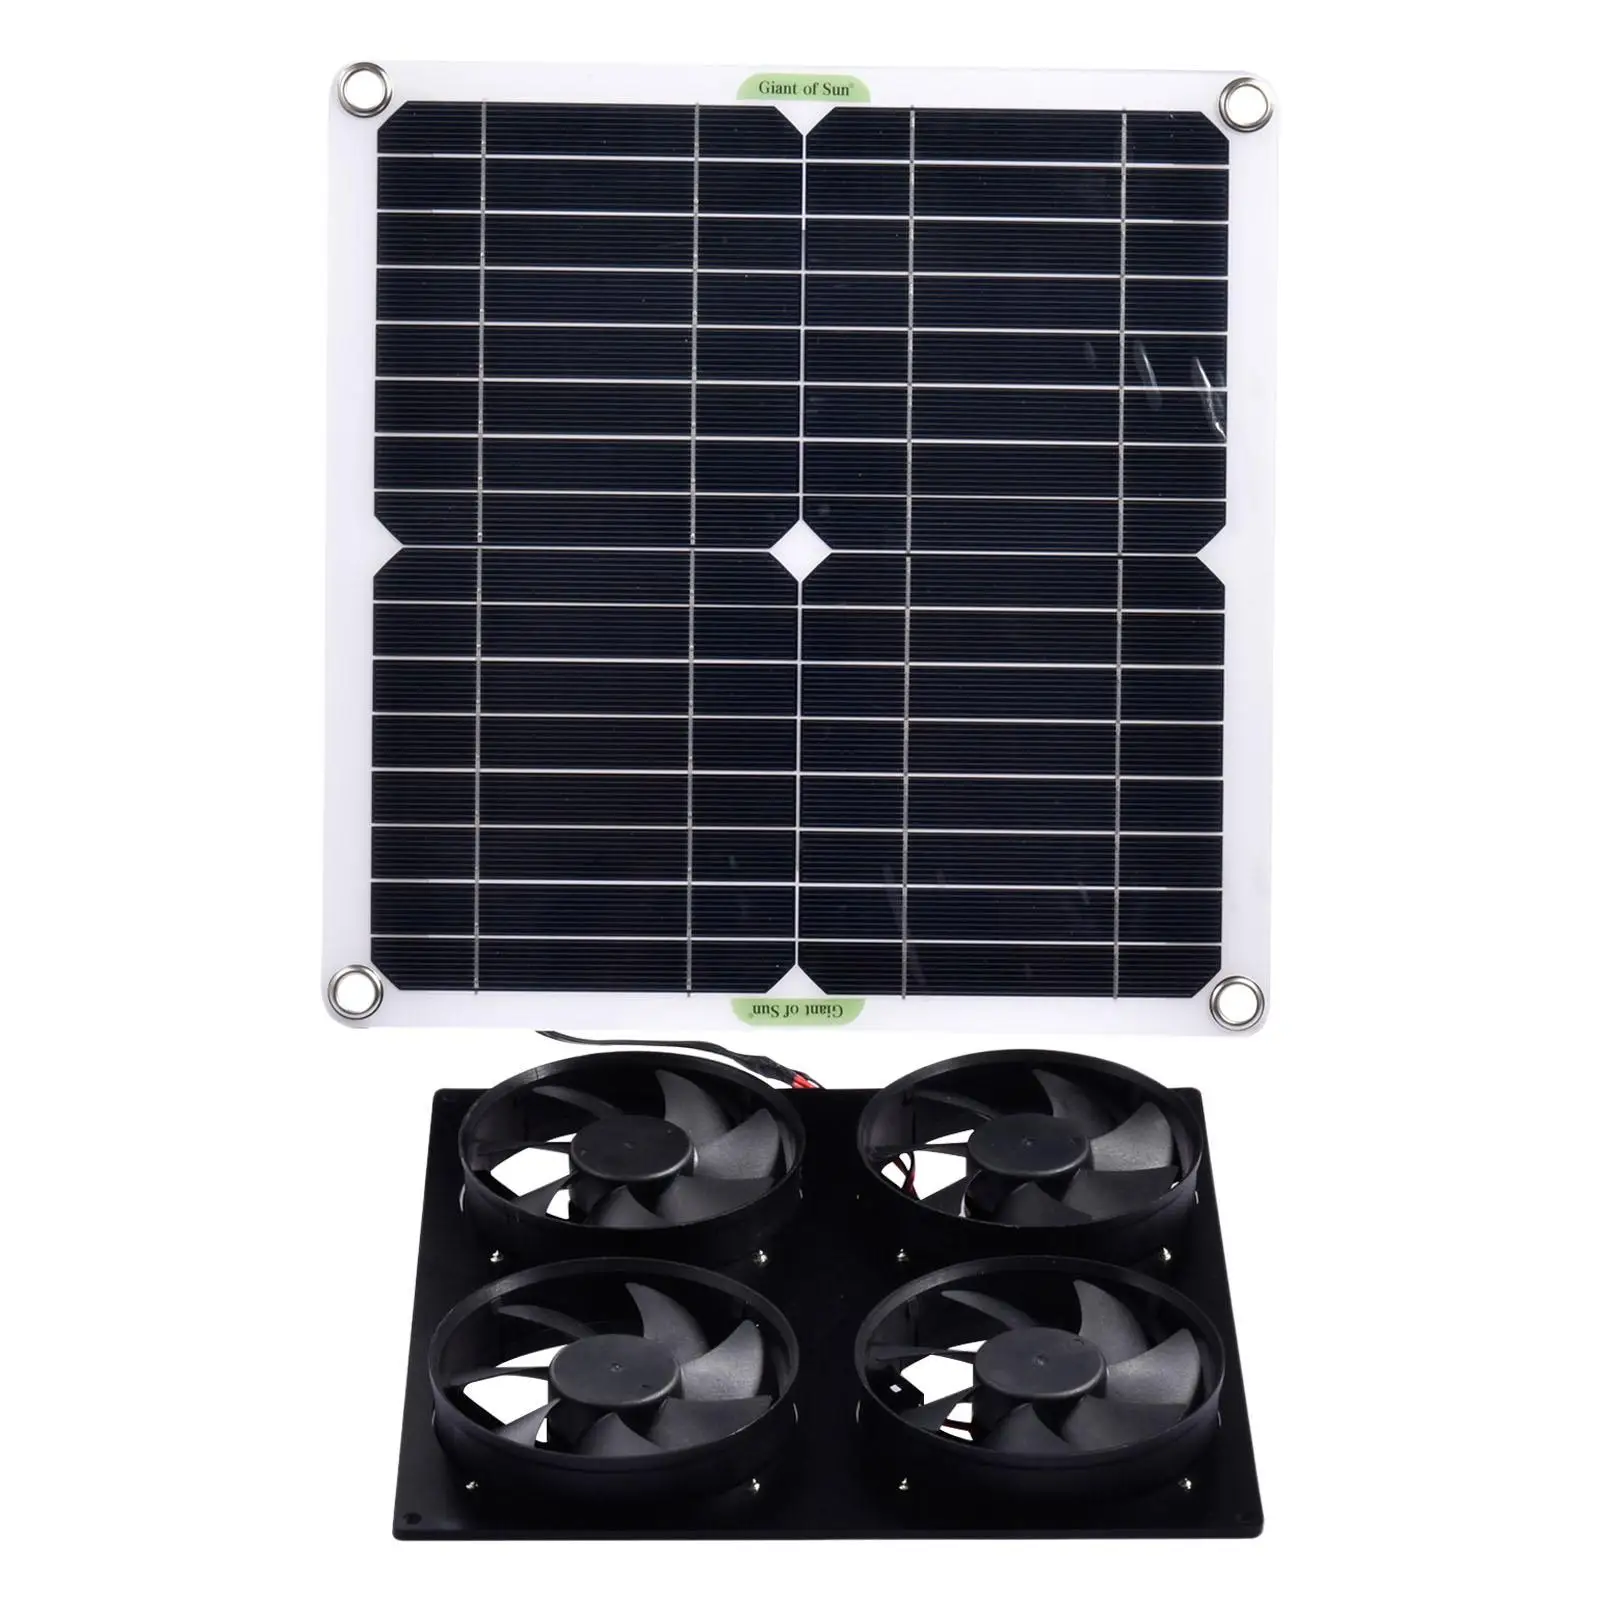 Indoor Solar Panel Fan Kit Four Exhaust Fan Panel Module Chicken House 6W Pet Mounted for Window RV Roofs Outdoor Shed Phone